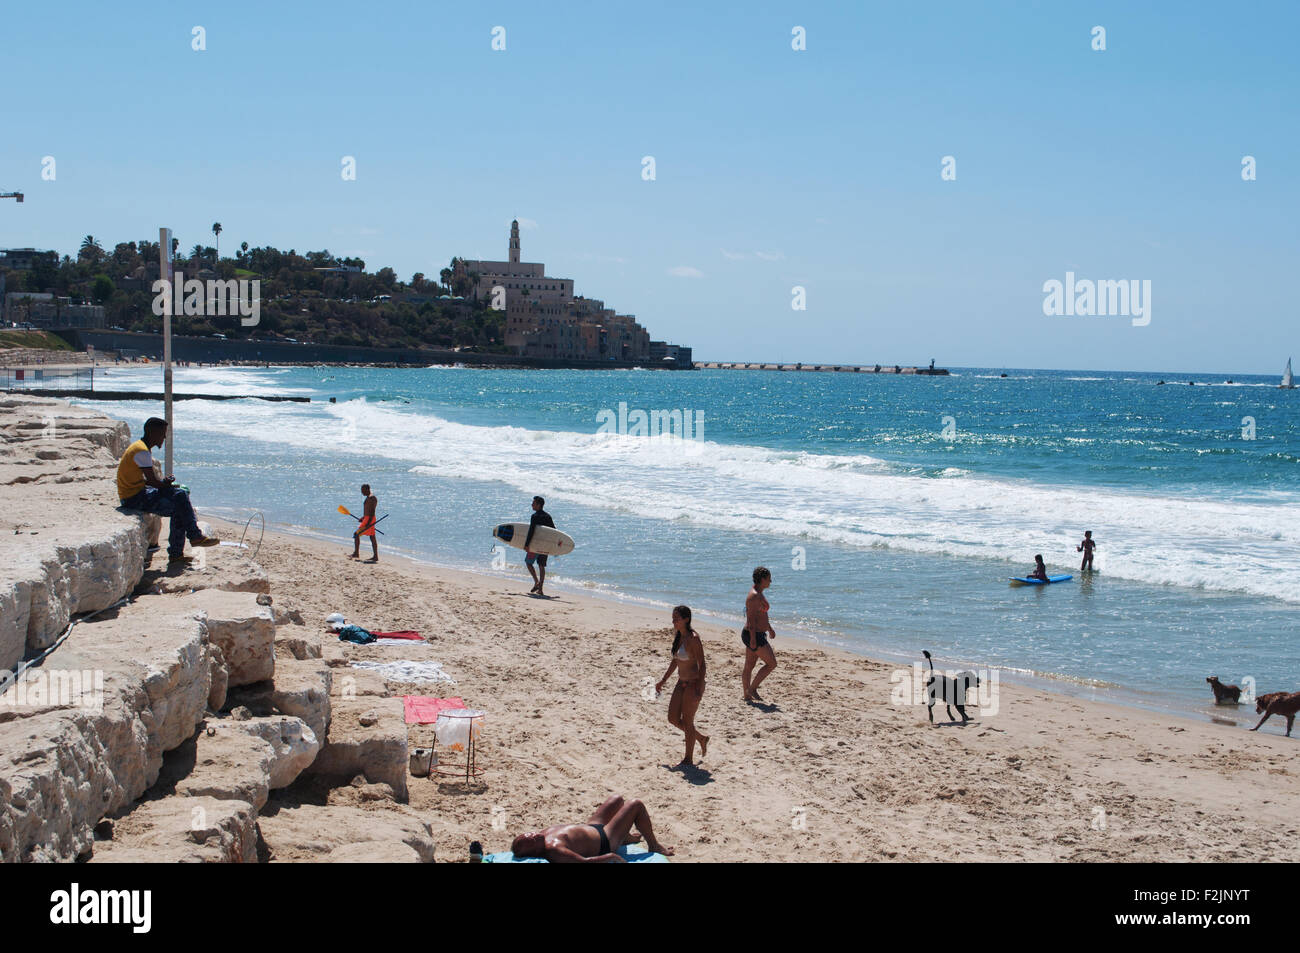 Israel: Old city of Jaffa seen from the beach, summer day in Israel Stock Photo